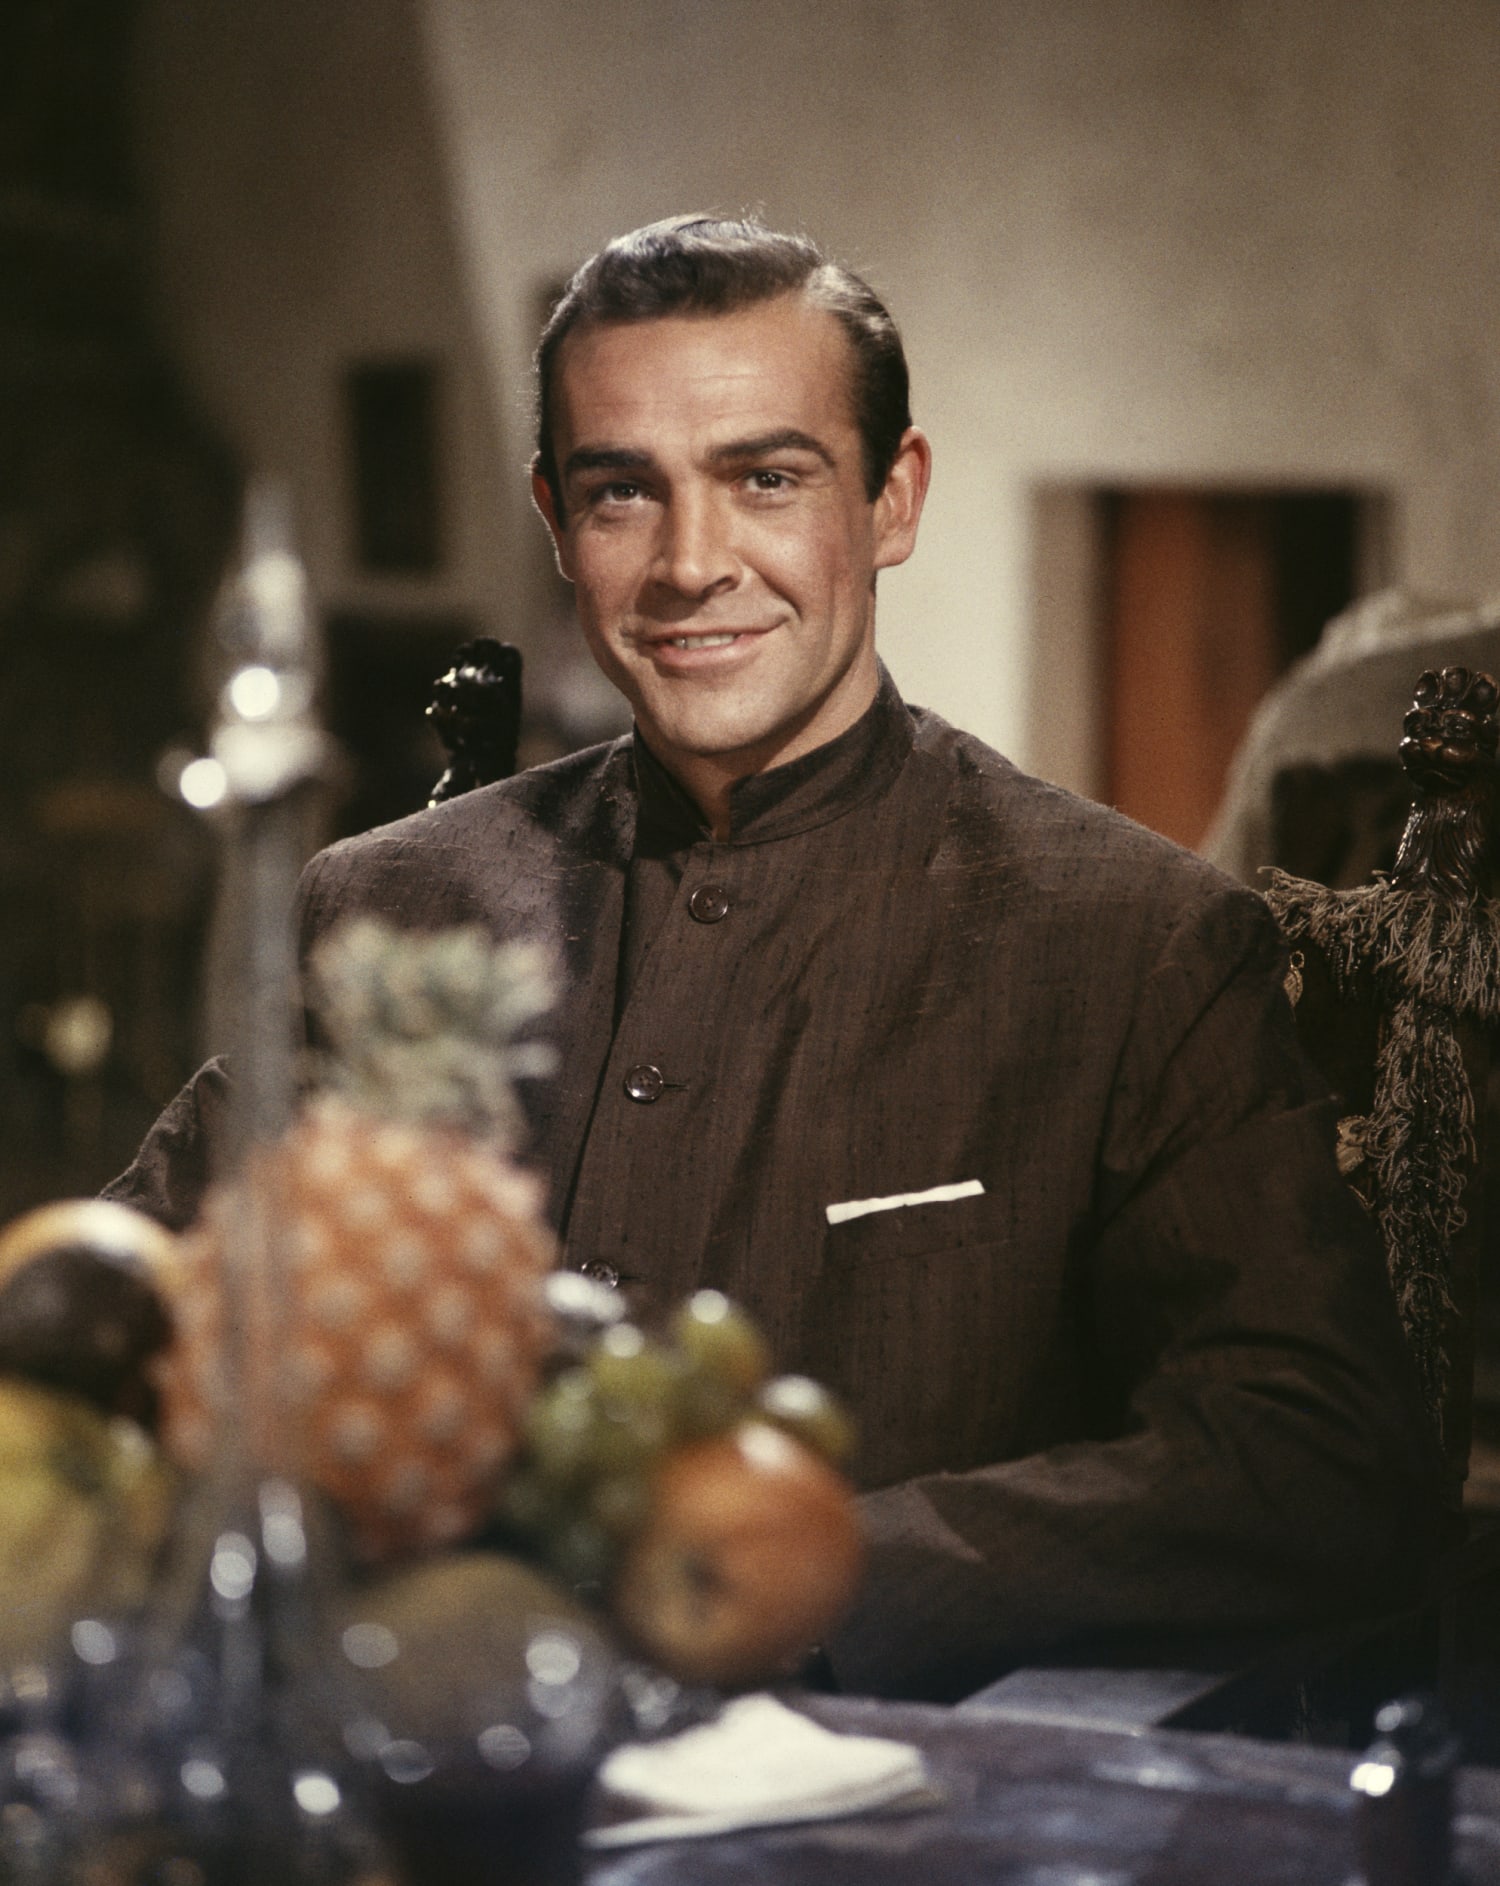 Sean Connery turns 85: A look back at his unforgettable movie costumes